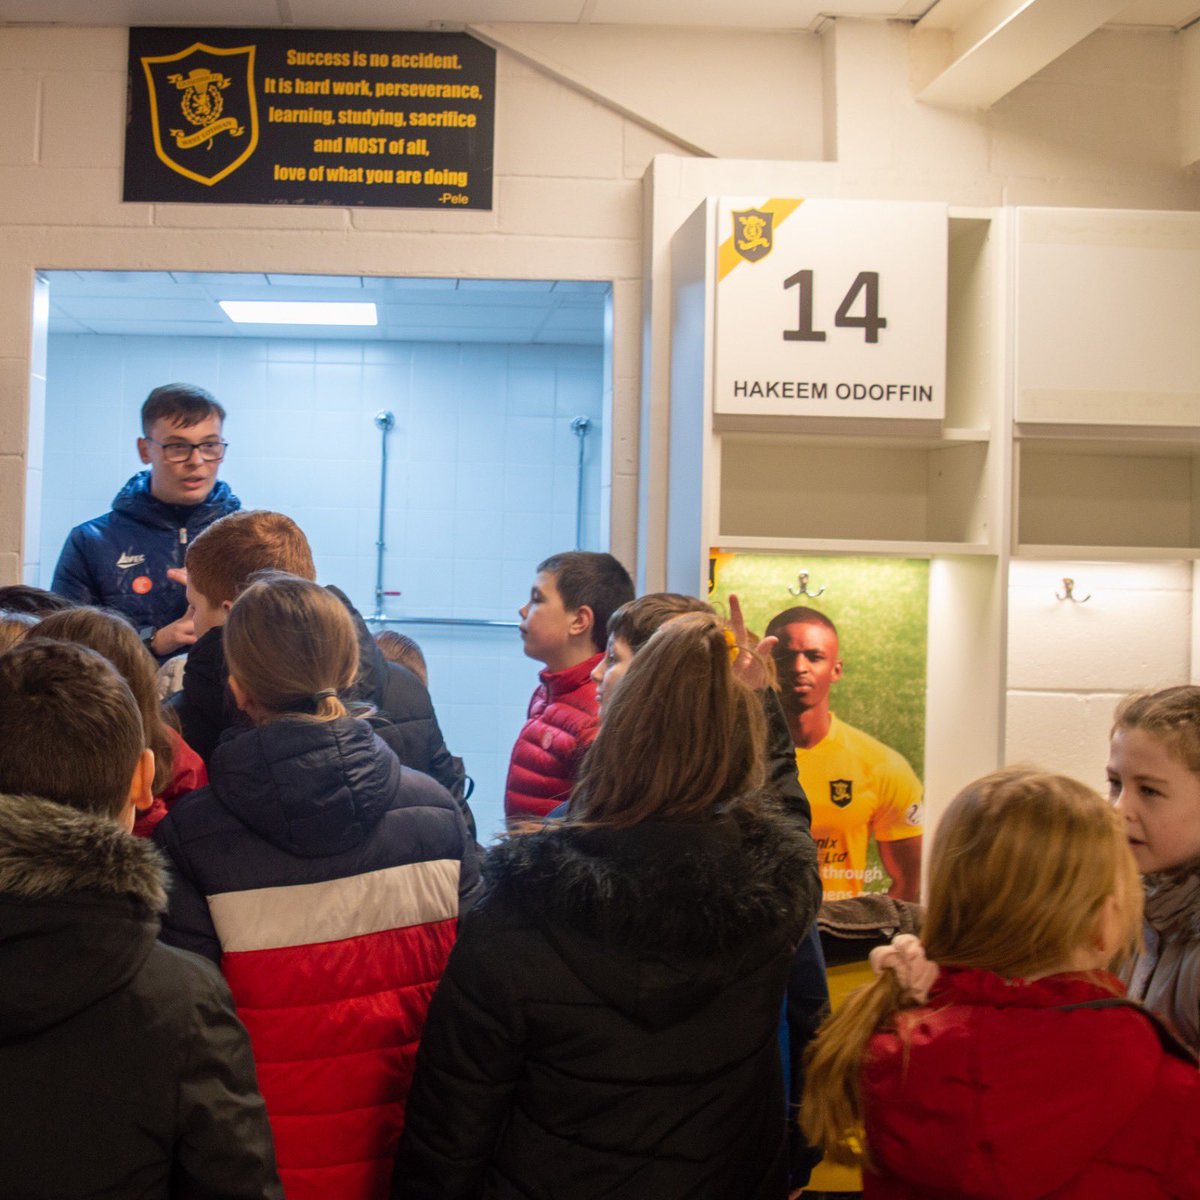 The club were then delighted to support  @SRtRCScotland’s Educational Club Event which was held at the stadium in December! The kids managed to get a tour of the stadium among their educational activities!